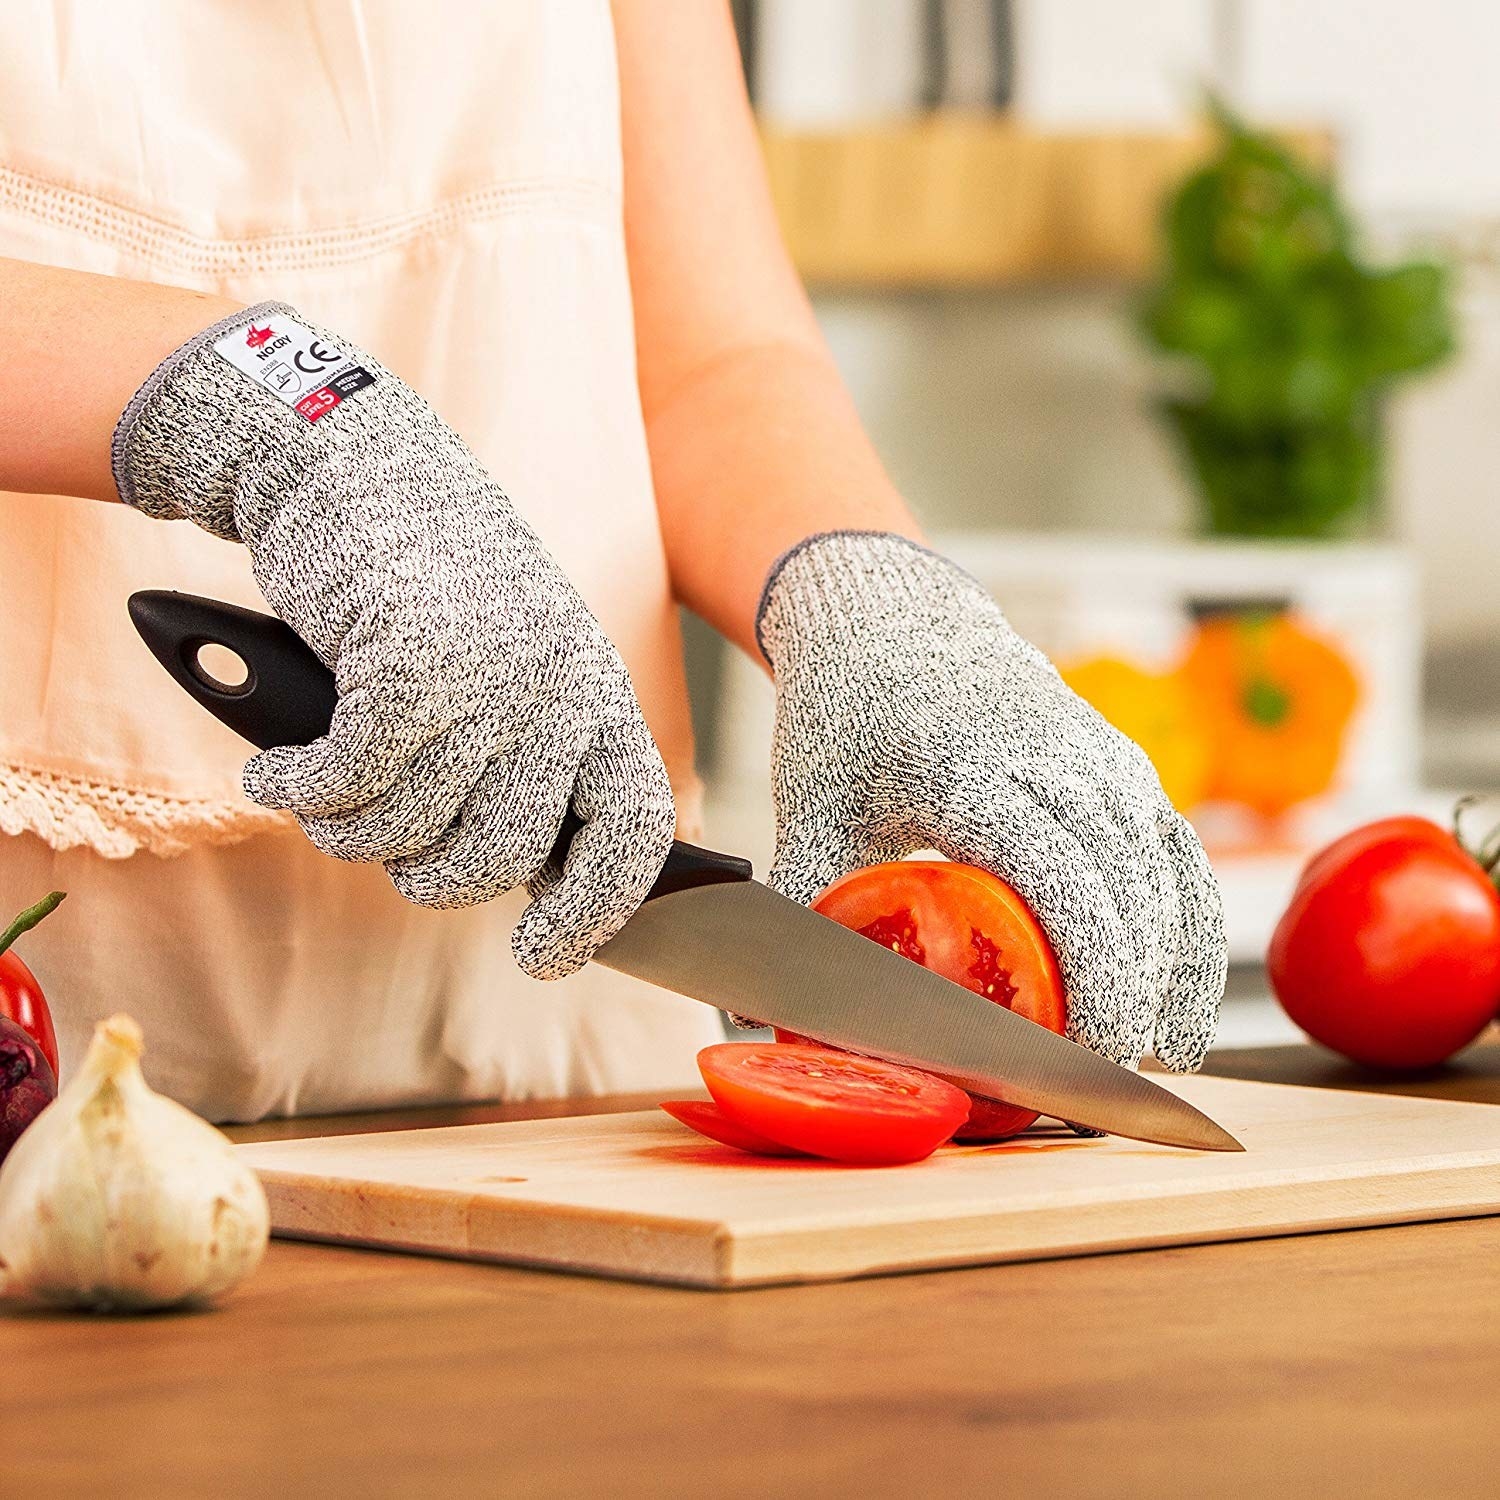 person wearing the gloves while cutting a tomato with a knife